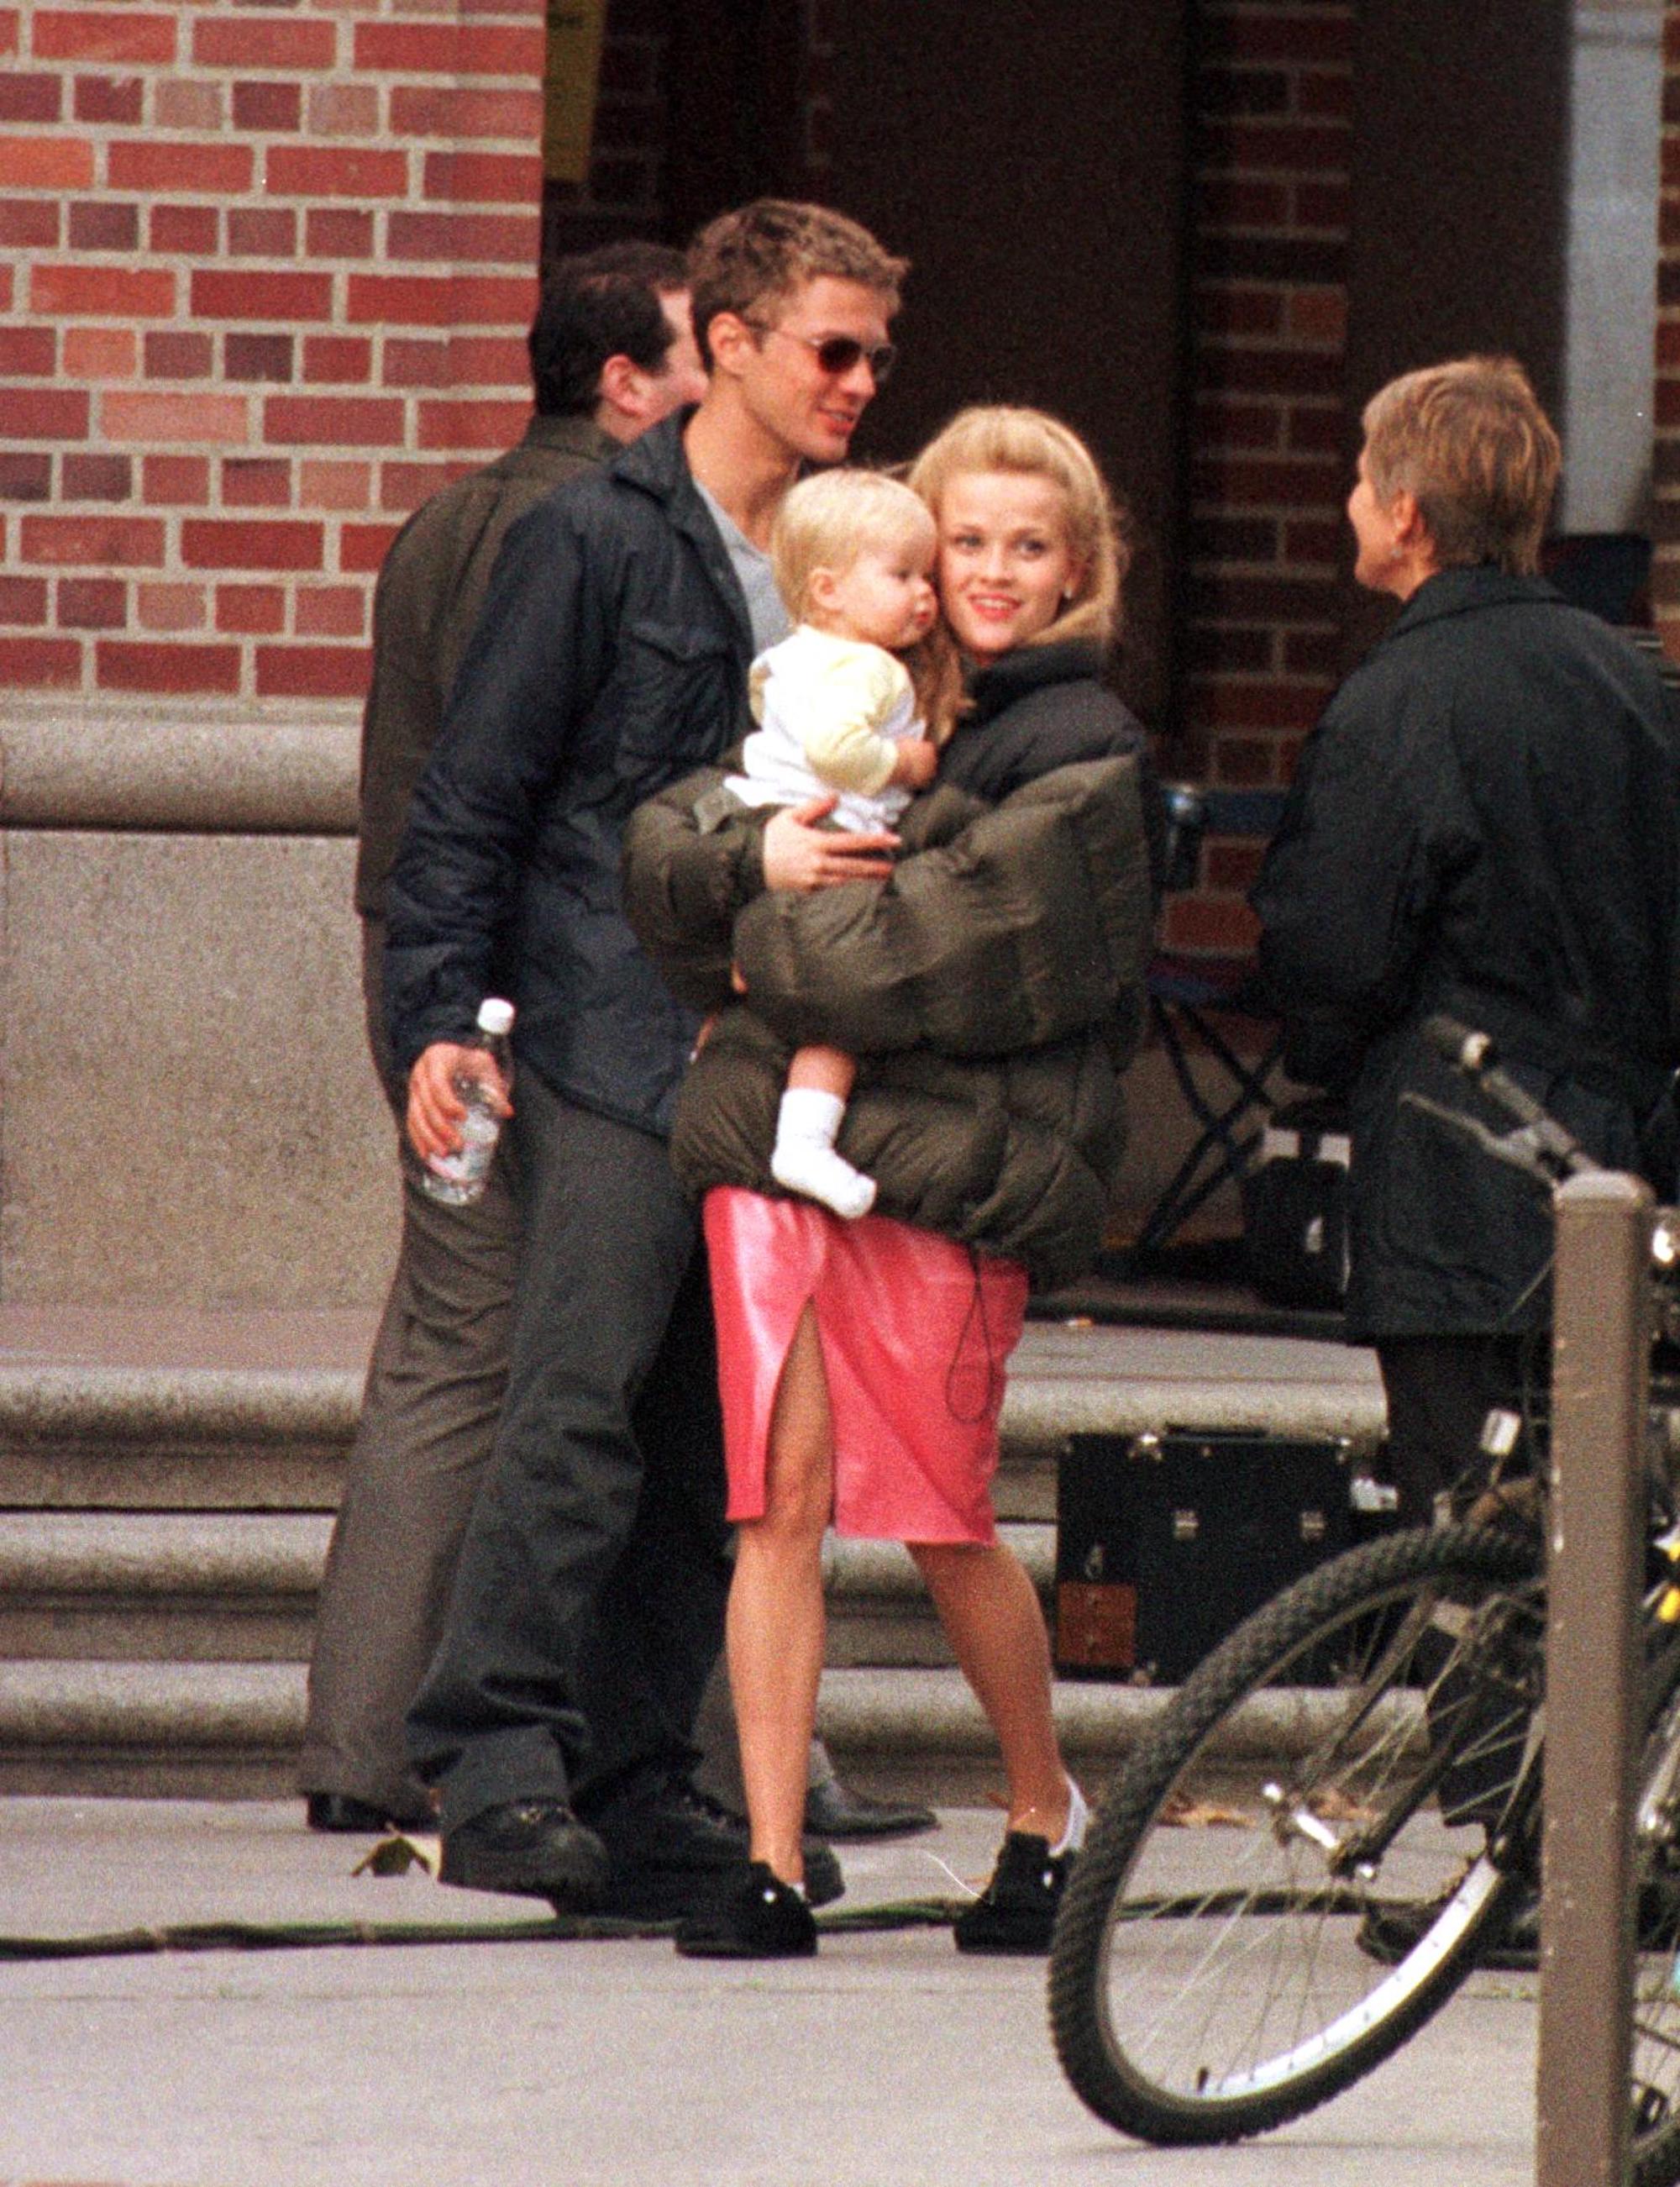 Ryan Phillippe, Ava Phillippe, and Reese Witherspoon on the set of 'Legally Blonde'